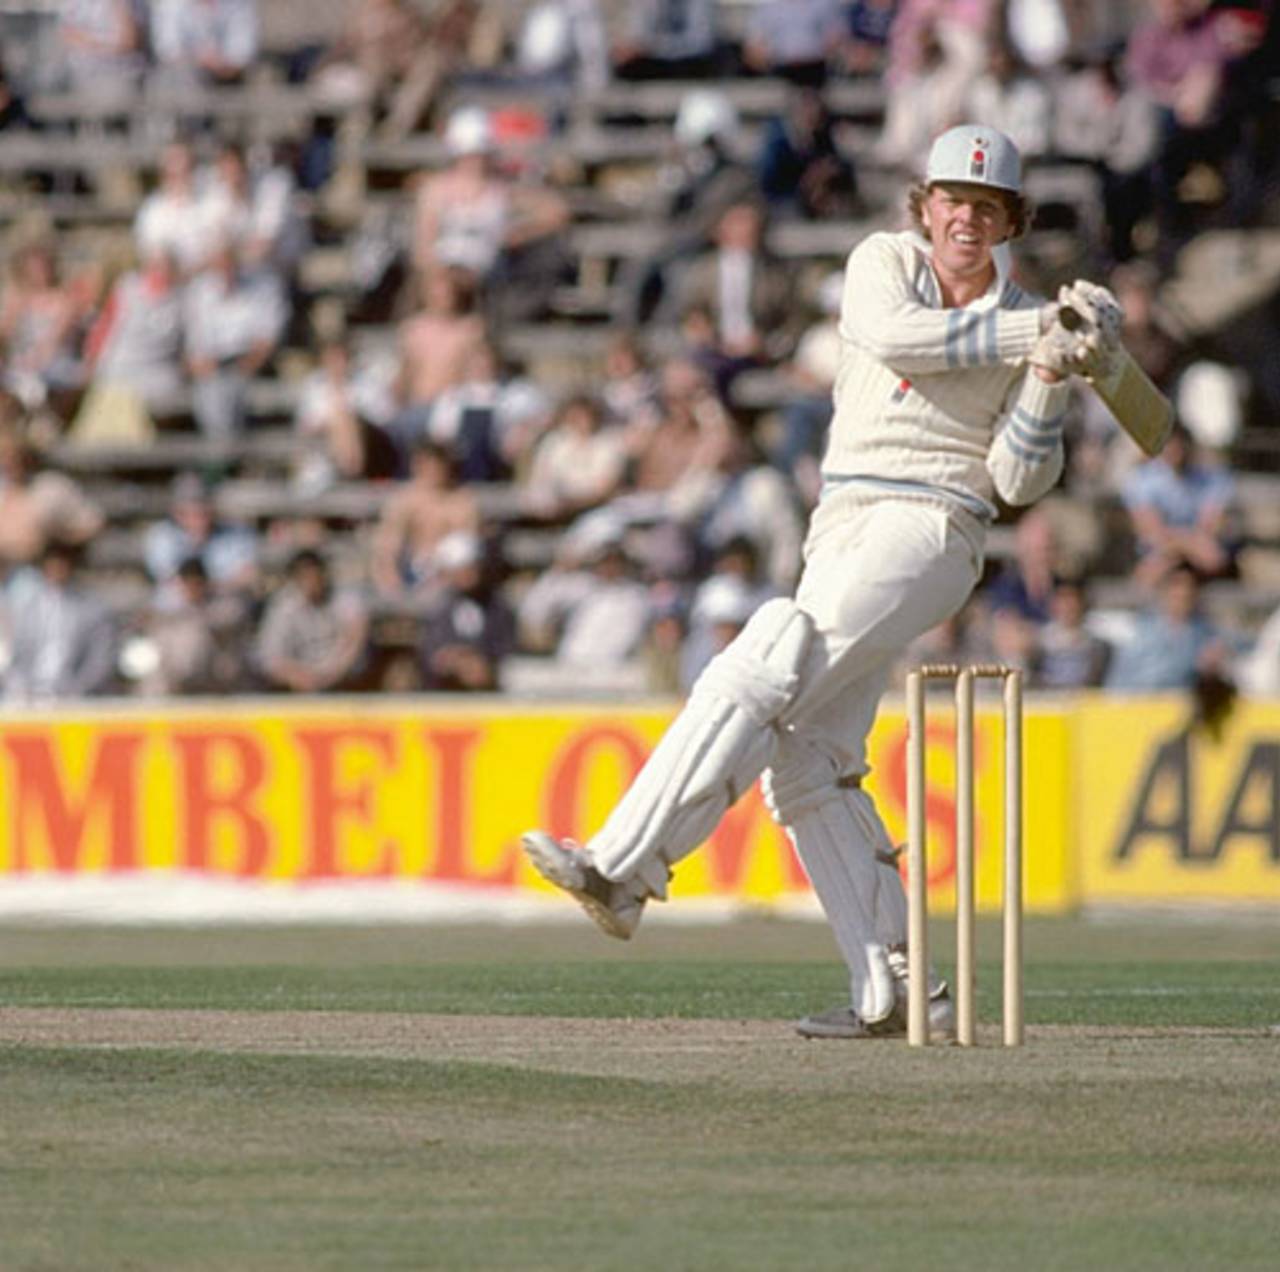 Barry Richards had to settle for expressing his batting genius outside the international arena&nbsp;&nbsp;&bull;&nbsp;&nbsp;Adrian Murrell/Getty Images